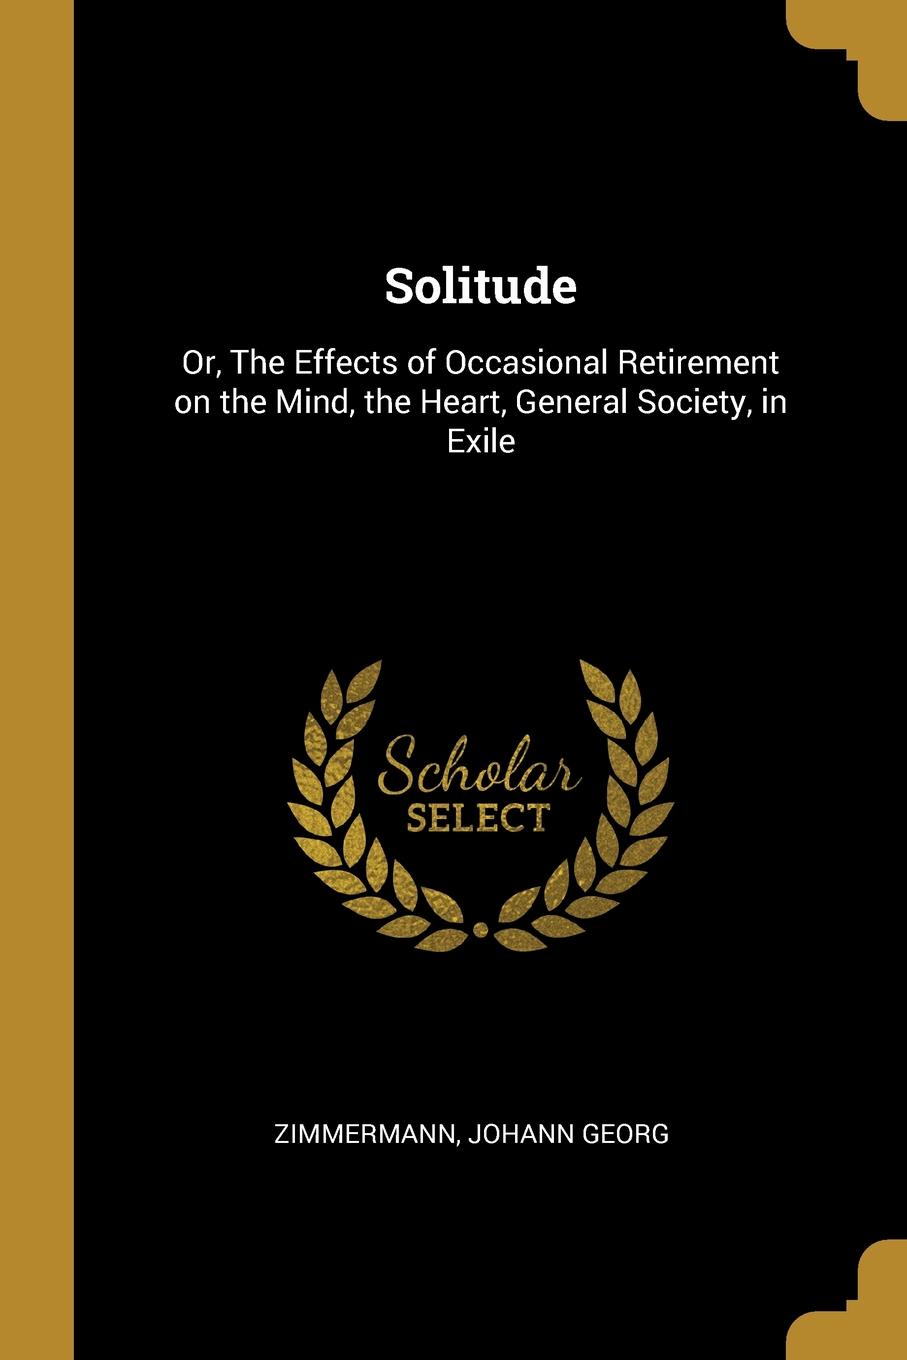 Solitude. Or, The Effects of Occasional Retirement on the Mind, the Heart, General Society, in Exile